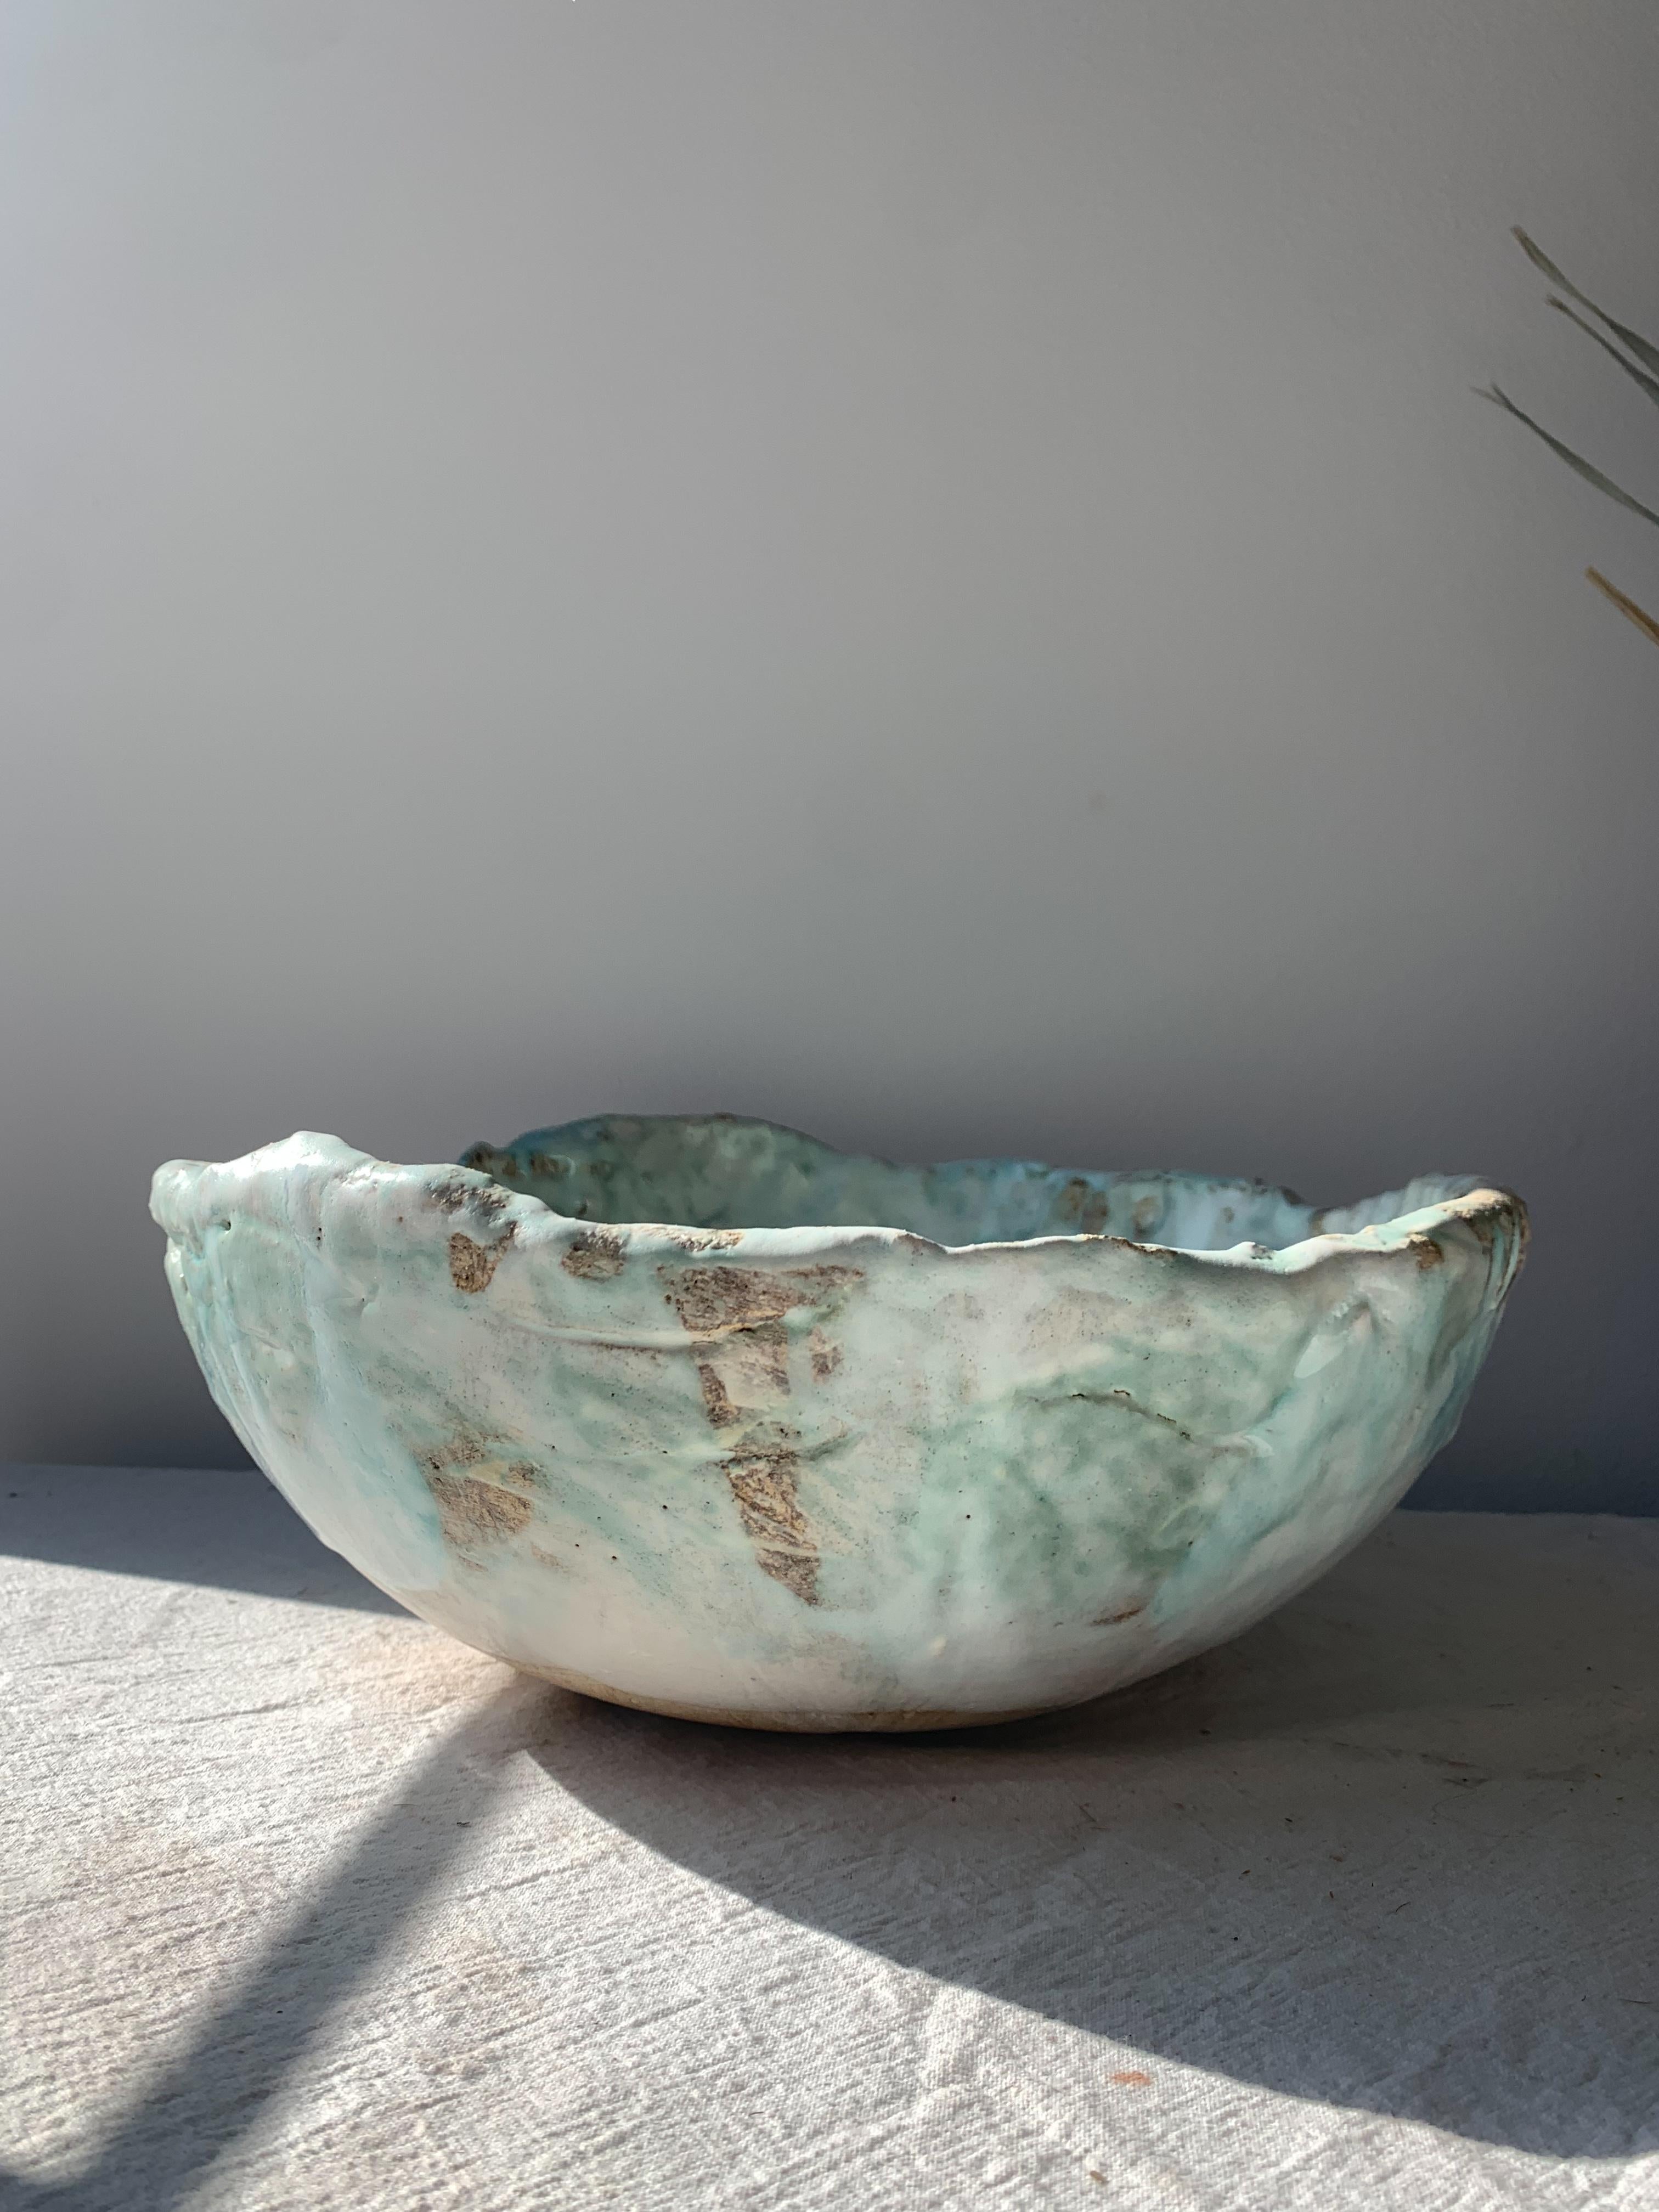 Beautiful wabi-sabi coil-built extra-large decorative ceramic bowl, for serving or display. The heavily textured surface is formed and glazed by hand in our Brooklyn studio, no two pieces will ever be exactly alike. Each piece is made to order, and